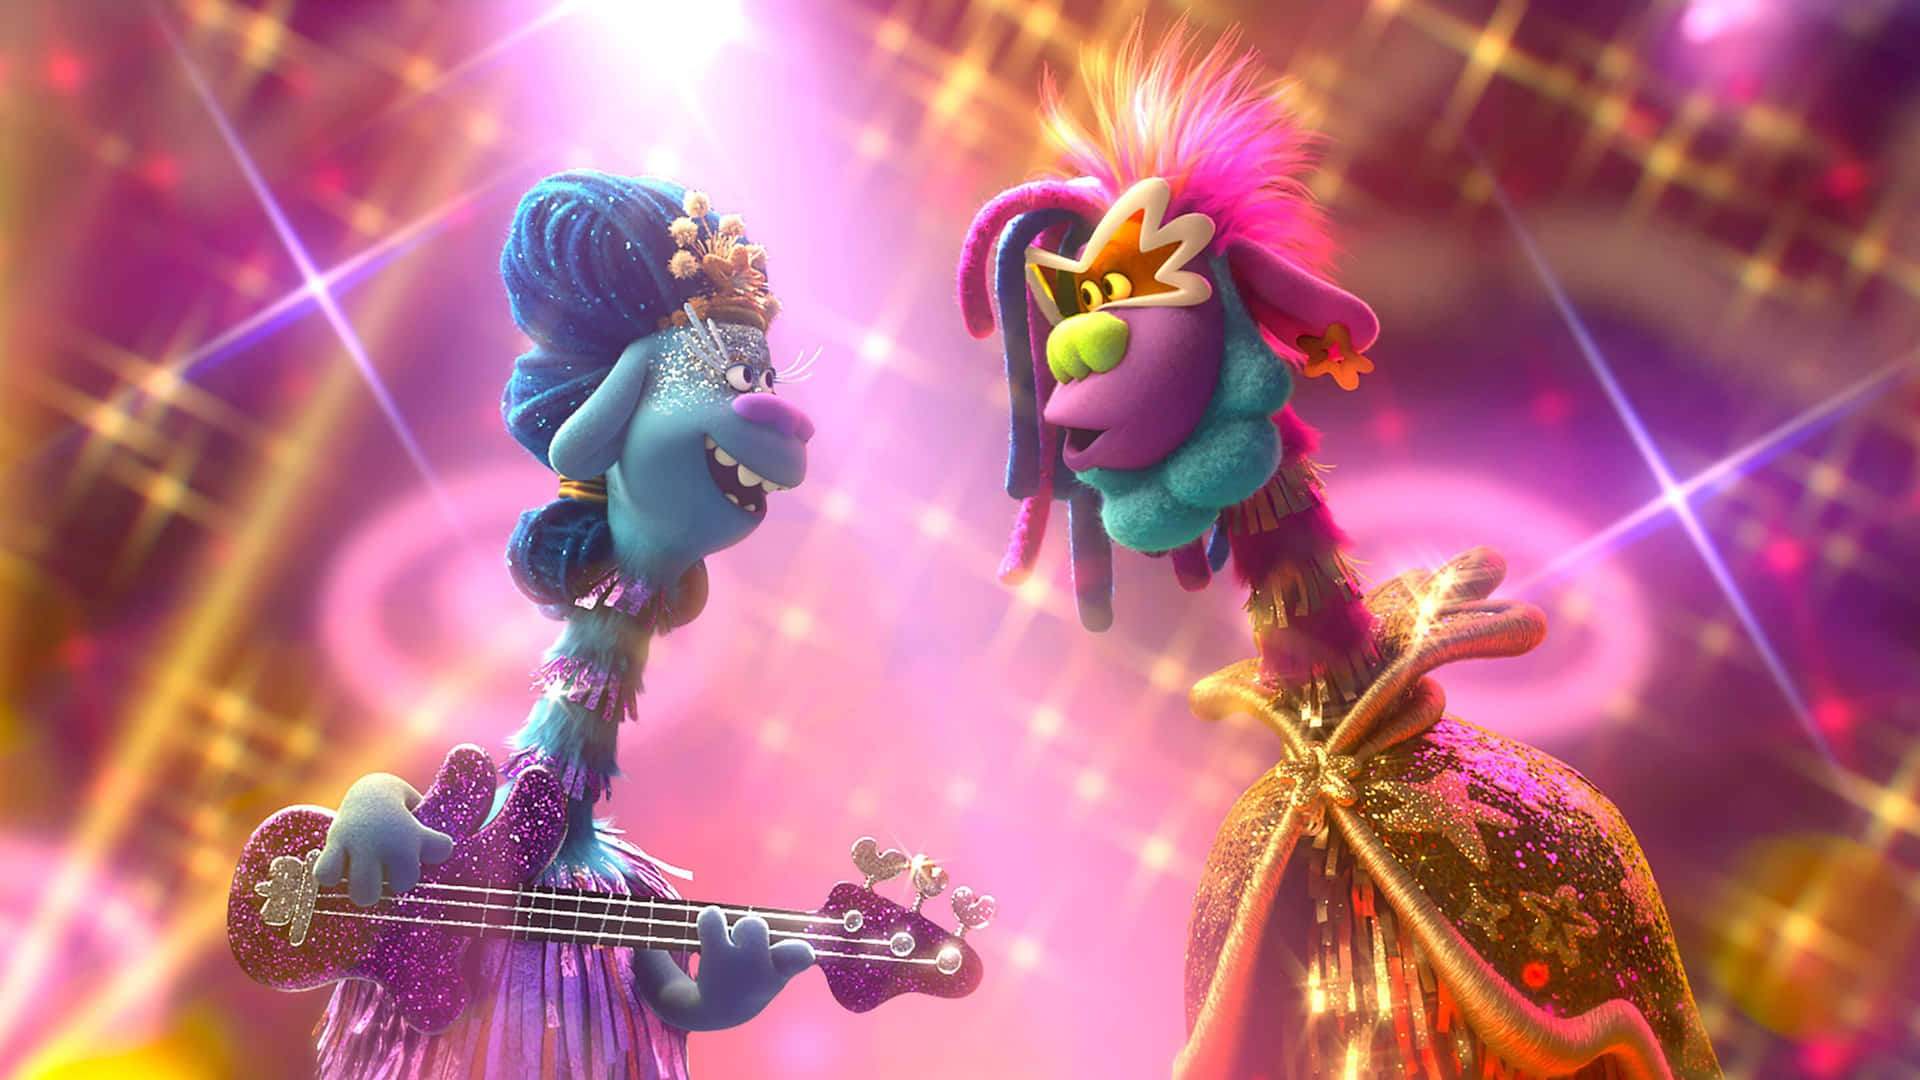 A colorful, closeup view of a Troll from DreamWorks' animated movie franchise.